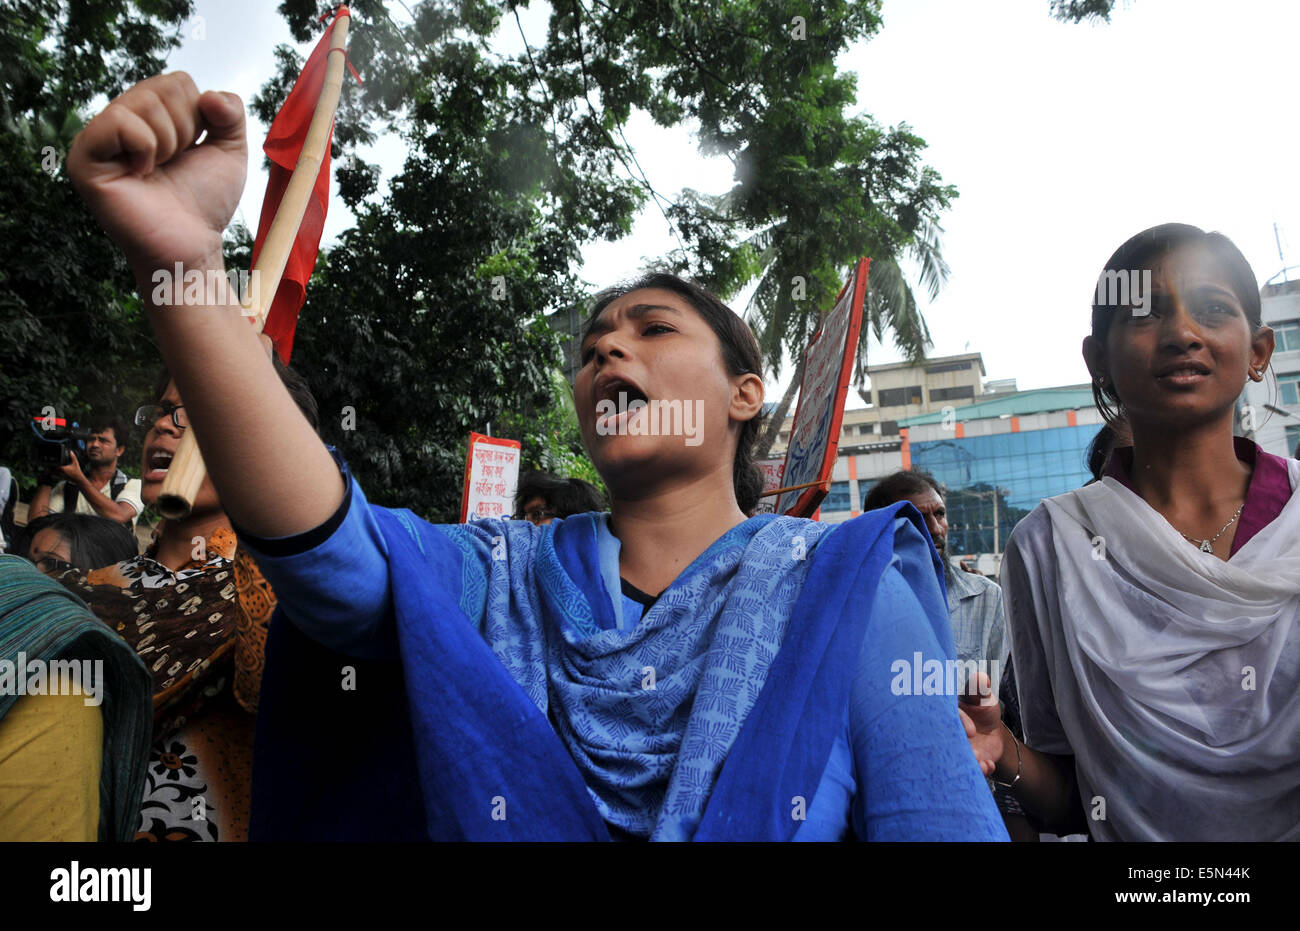 Dhaka, Bangladesh. 4th Aug, 2014. An activist of left-wing political party shouts slogans during a protest rally against unpaid salaries in front of Press Club in Dhaka, Bangladesh, Aug. 4, 2014. Several hundreds of workers demonstrated Monday demanding three months unpaid salaries and Eid Bonus. Credit:  Shariful Islam/Xinhua/Alamy Live News Stock Photo